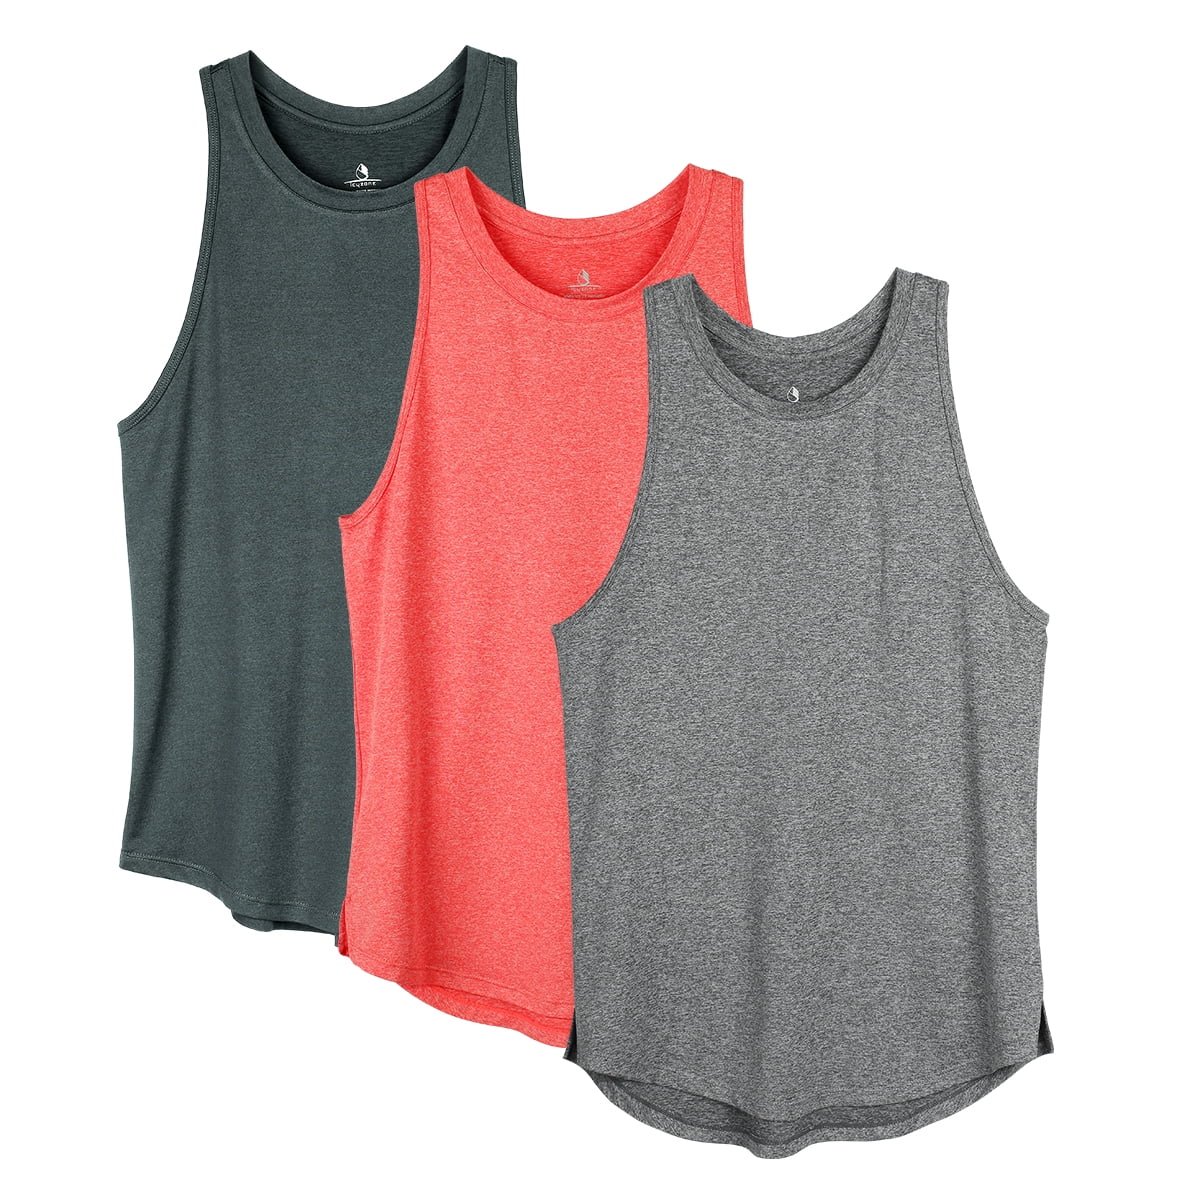 icyzone Women's Racerback Workout Tank Tops - Athletic Yoga Tops, Running  Exercise Gym Shirts (Pack of 3) - Walmart.com